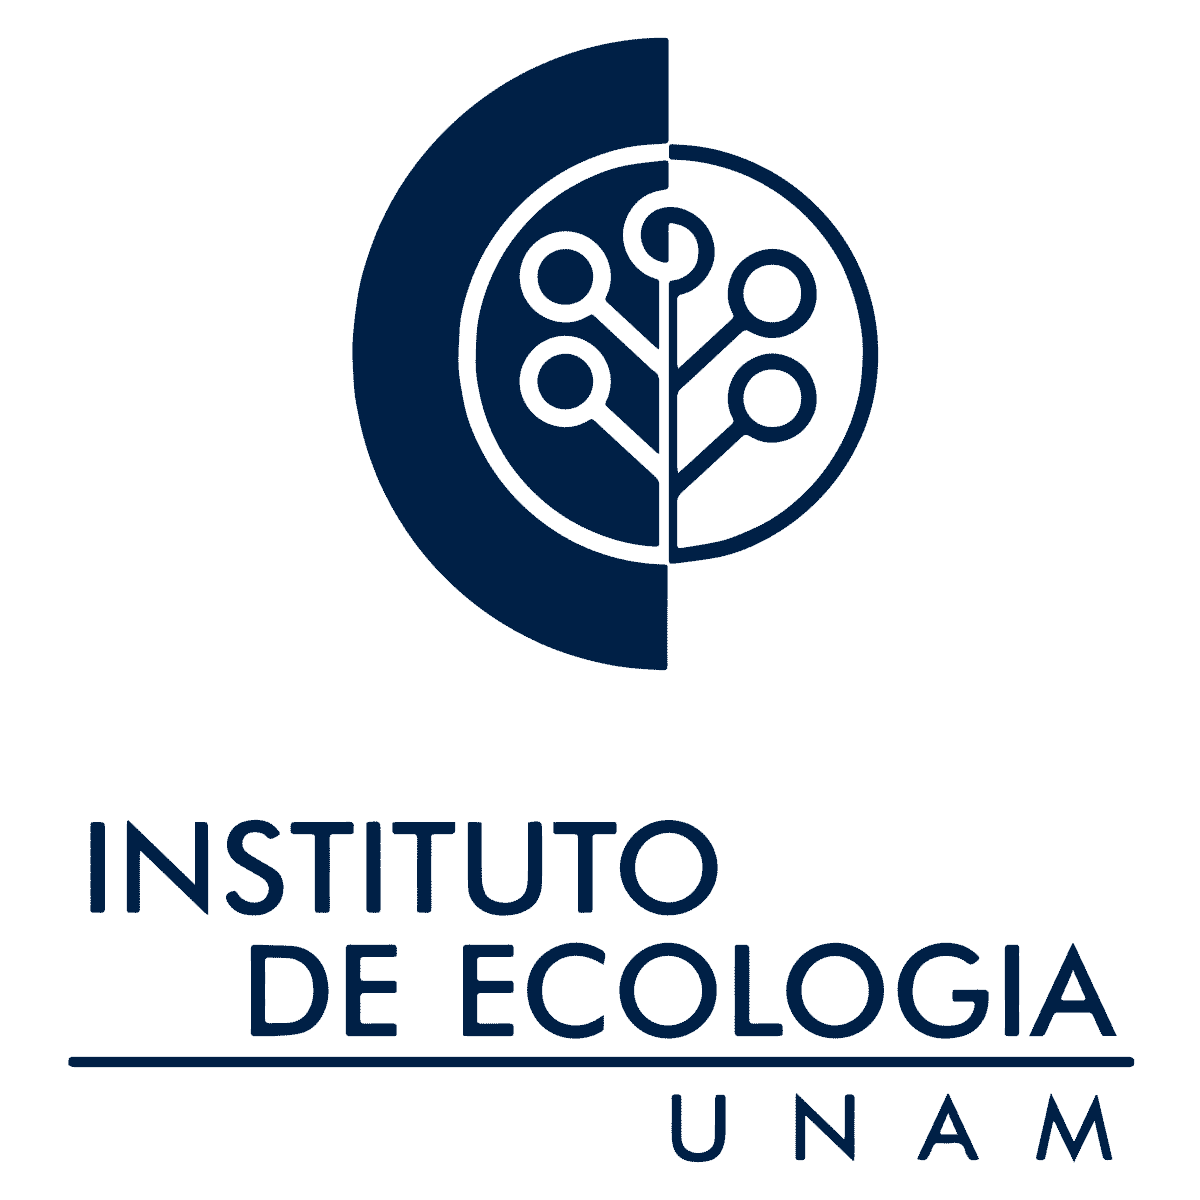 Image_InstitutoDeEcologia.png